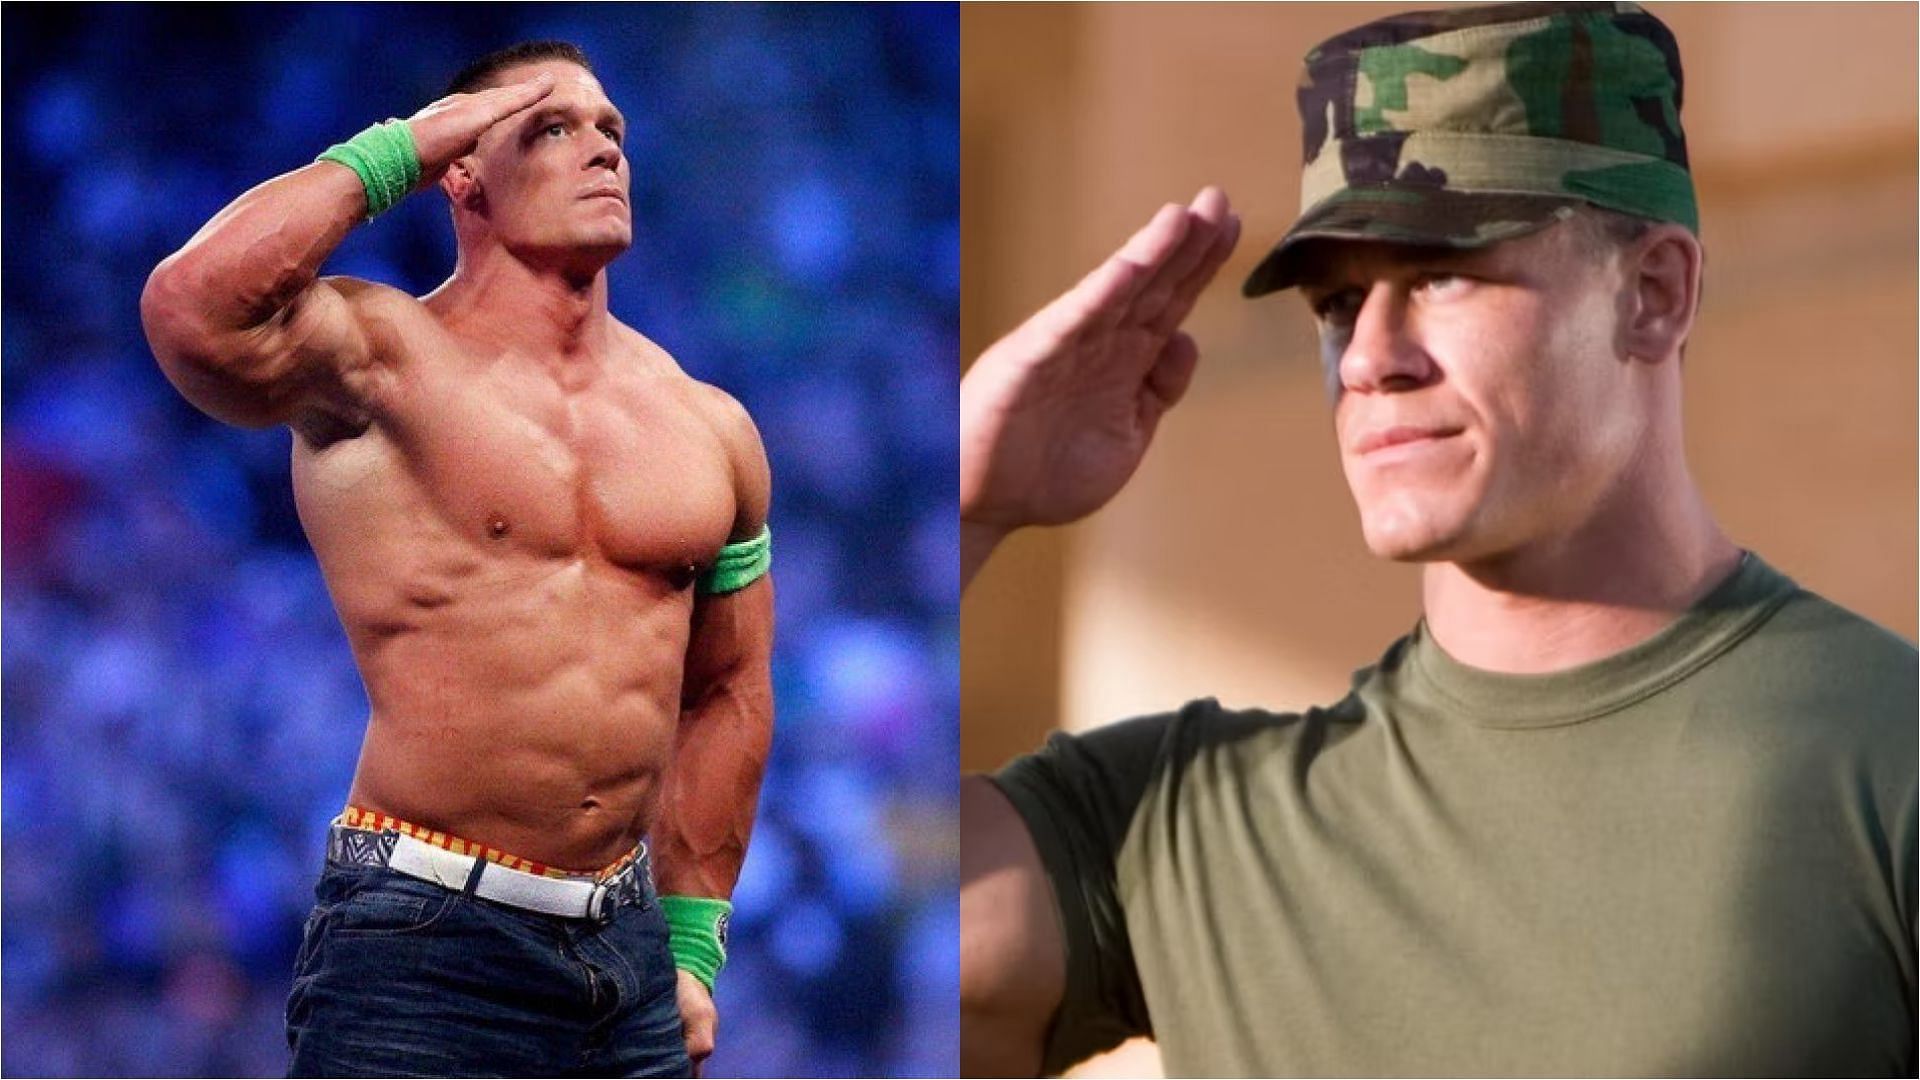 For a while, many fans thought Cena was an actual marine